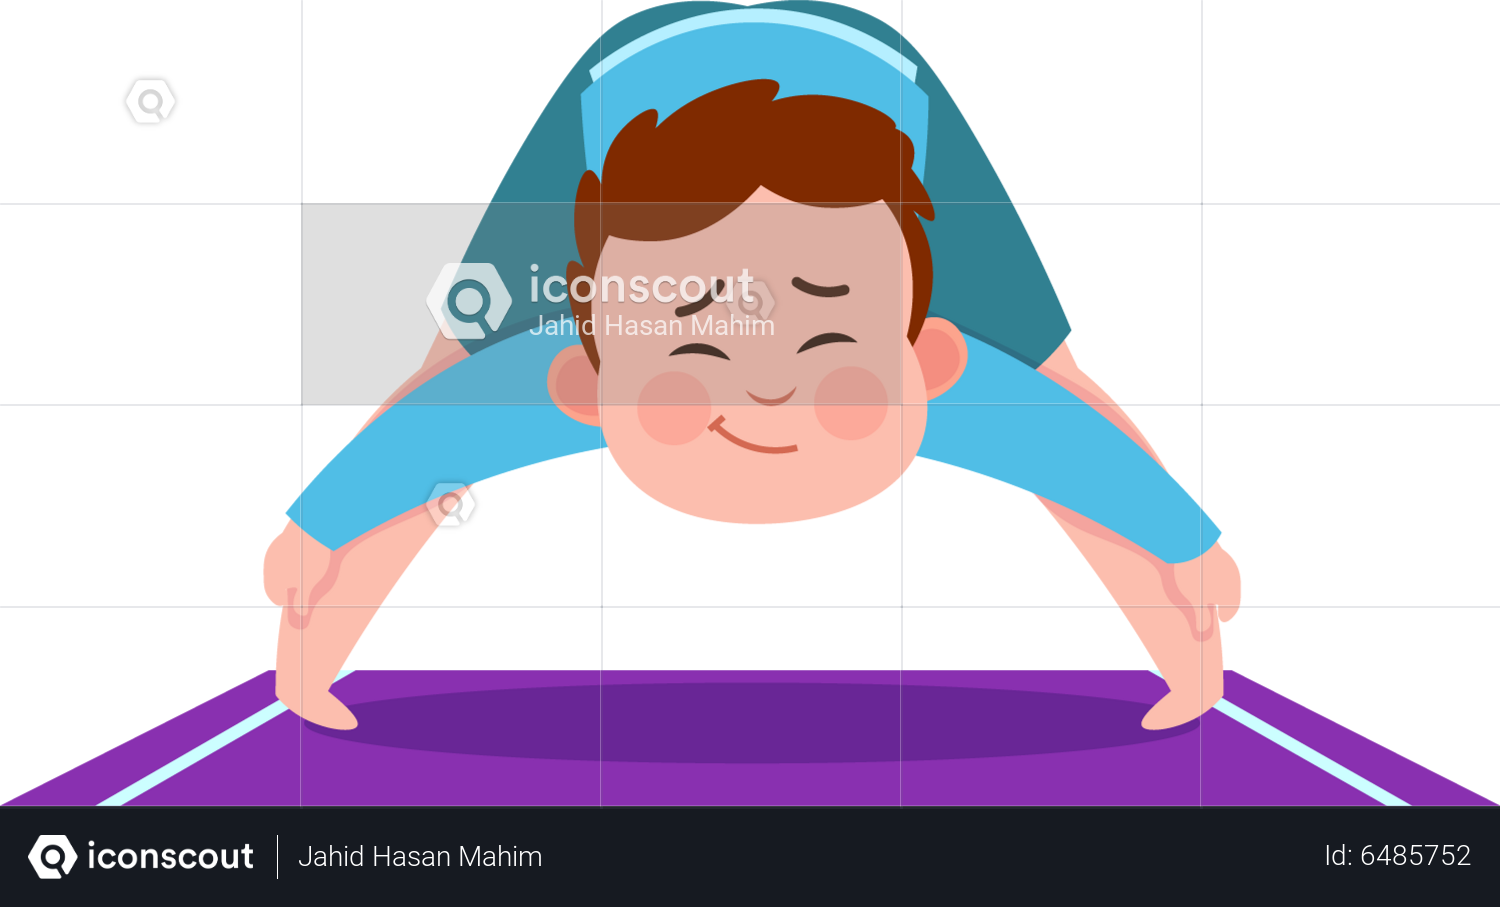 Yoga Pose Bridge: Over 1,064 Royalty-Free Licensable Stock Illustrations &  Drawings | Shutterstock